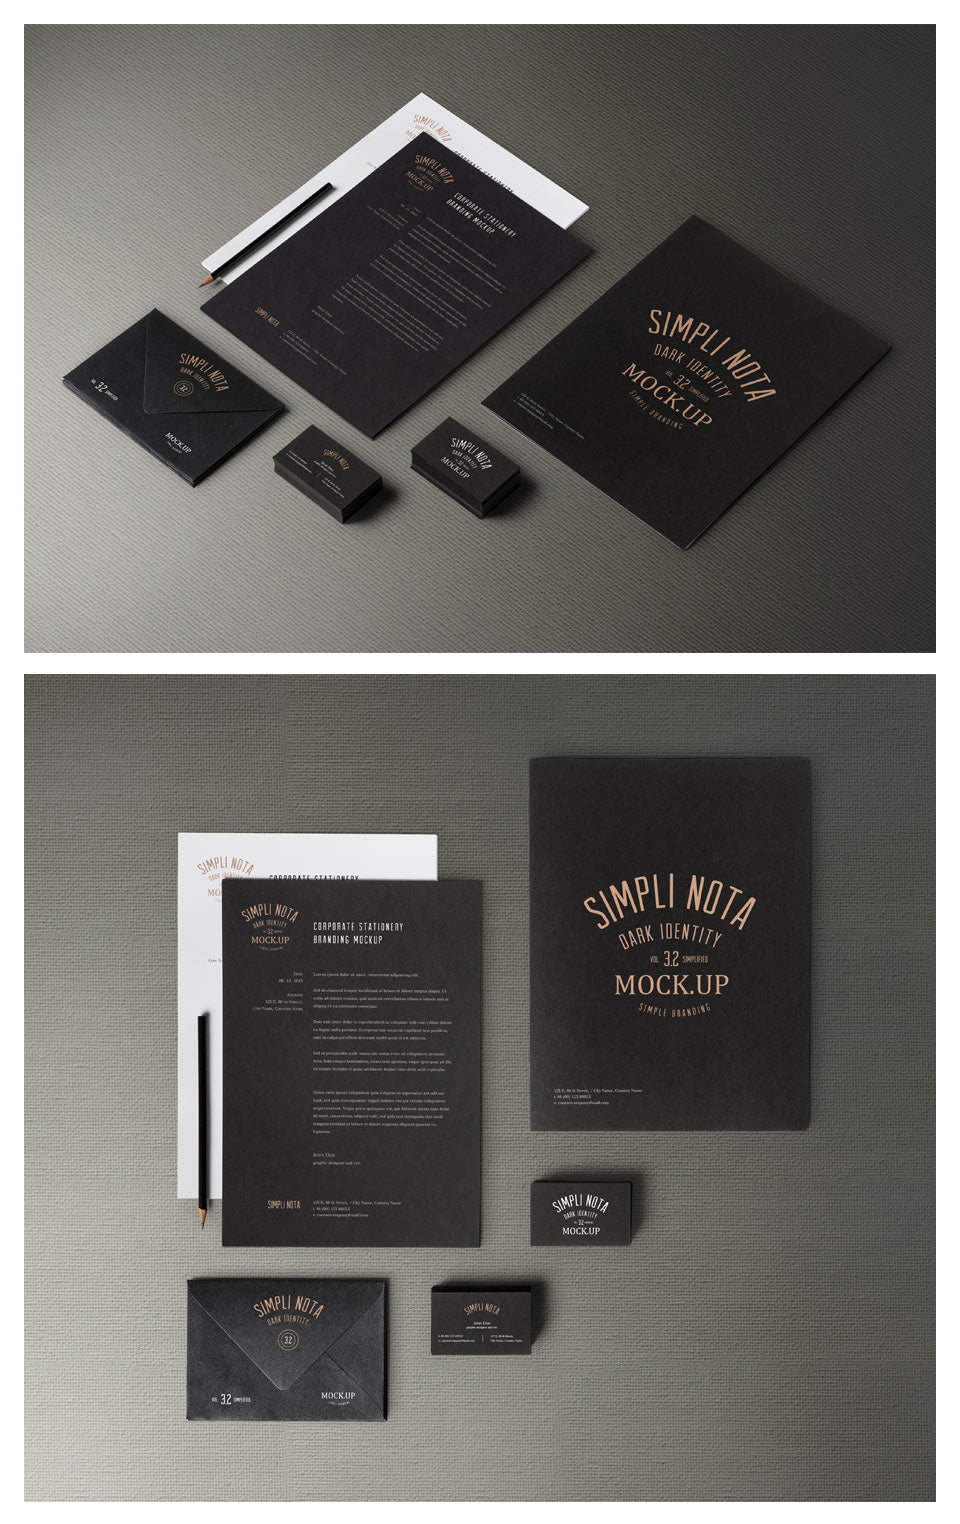 Download Free Stationery Branding Mockup Psd Collection Creativebooster PSD Mockup Templates